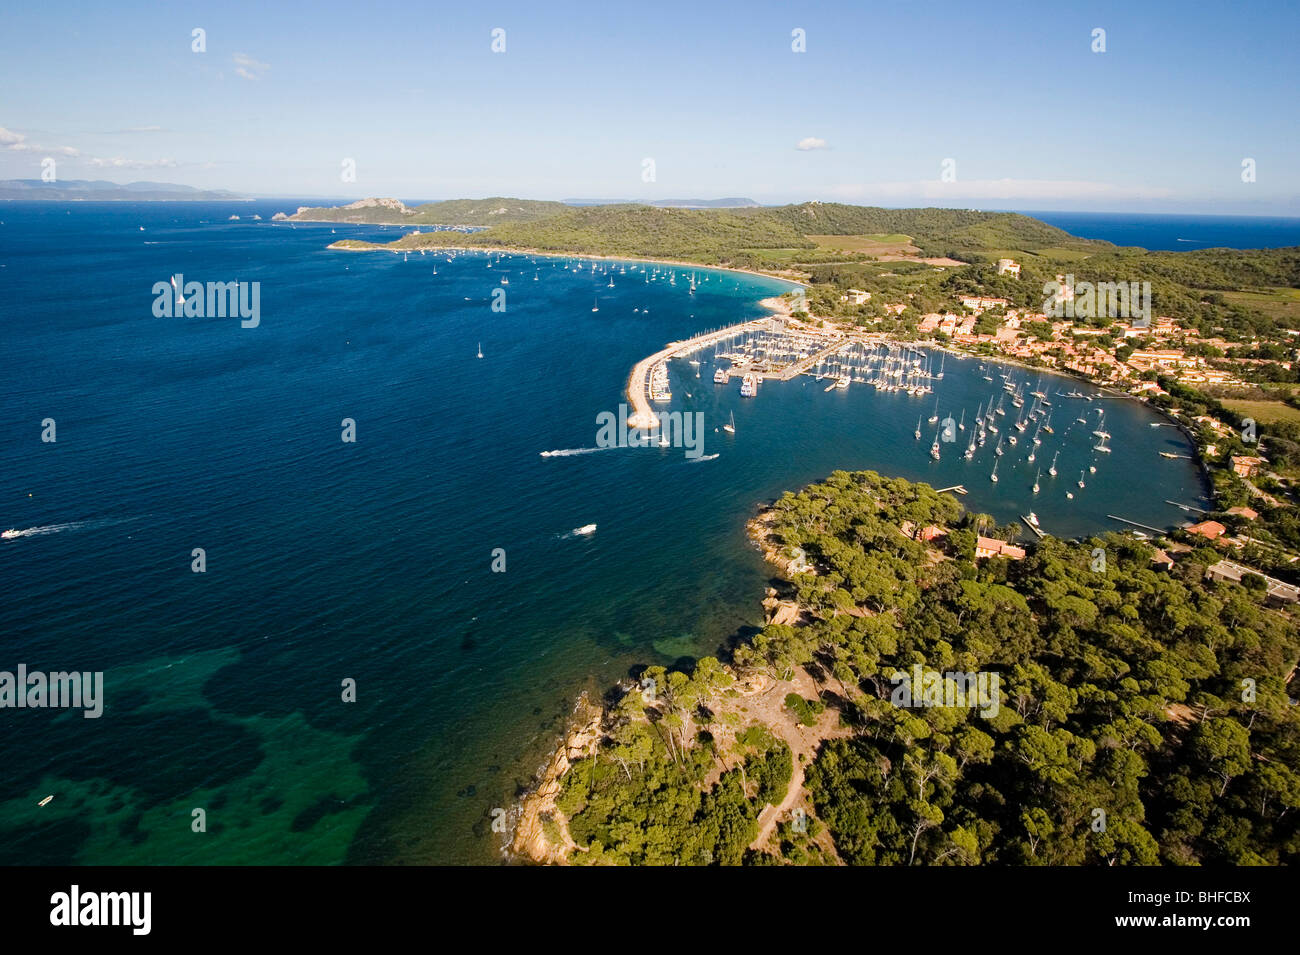 Aerial view of Port Cros with bay and harbour, Iles d'Hyeres, France, Europe Stock Photo